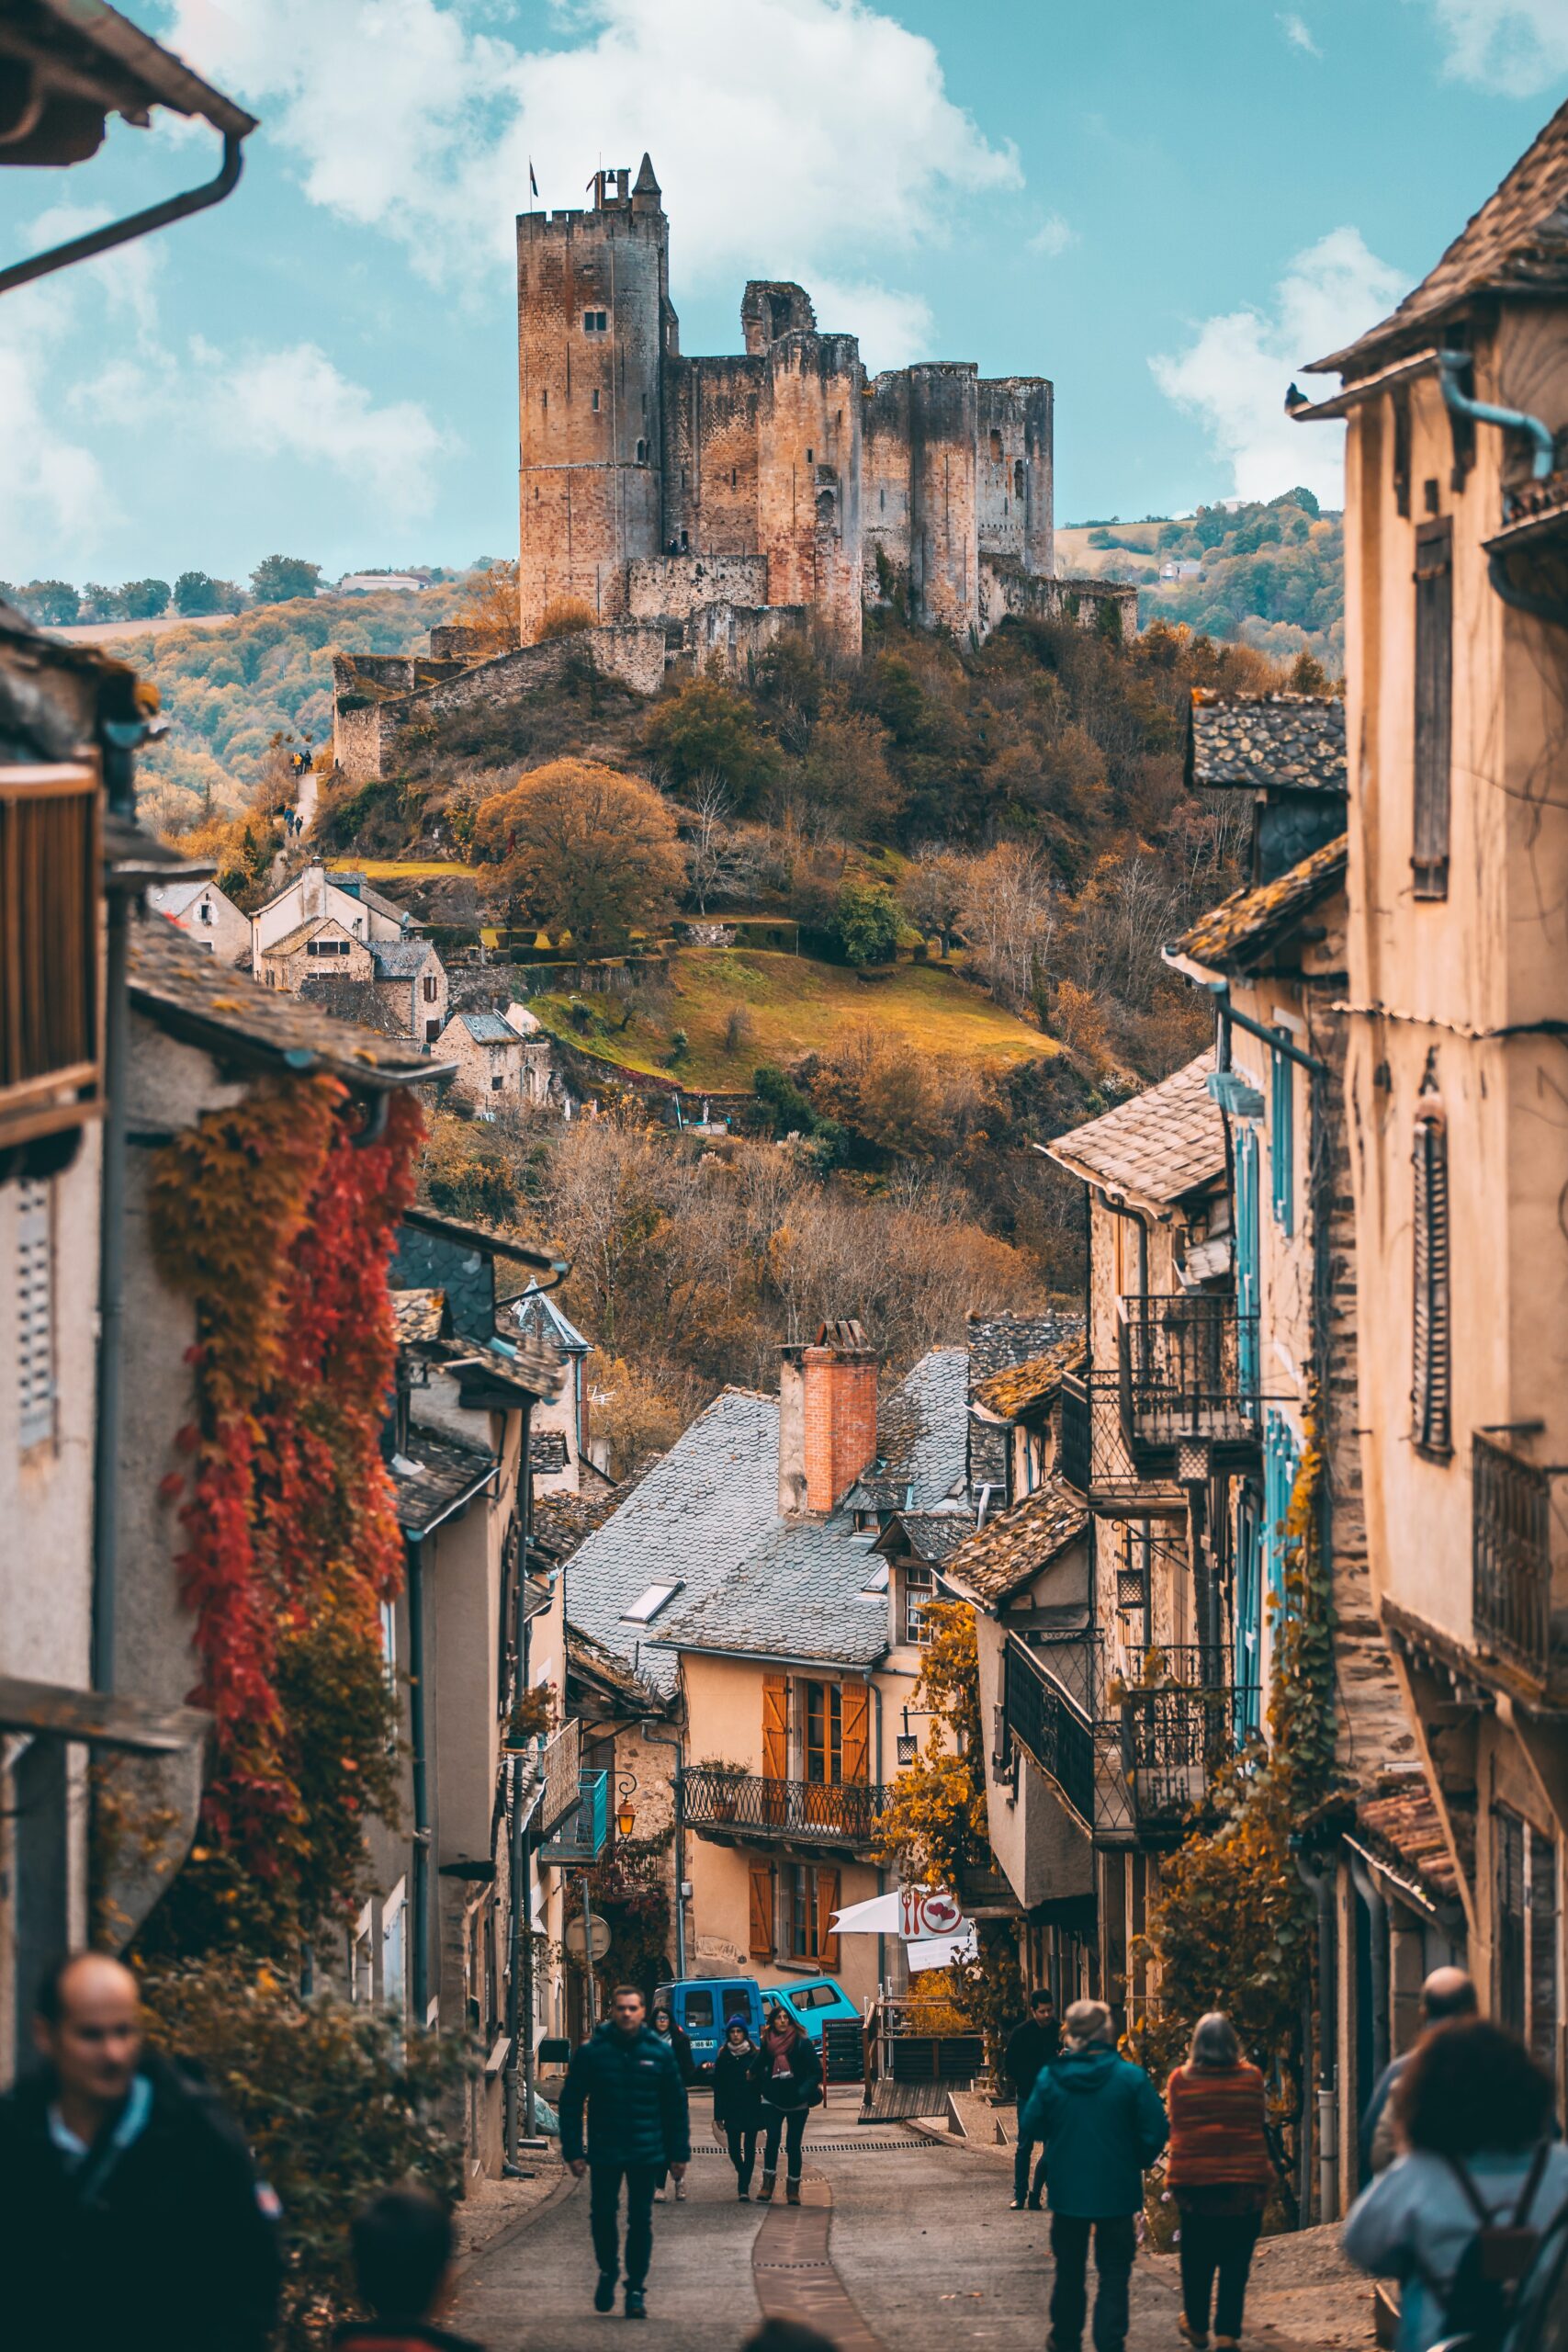 Explore the medieval castles in Najac, France, it is one of the hidden gems in France